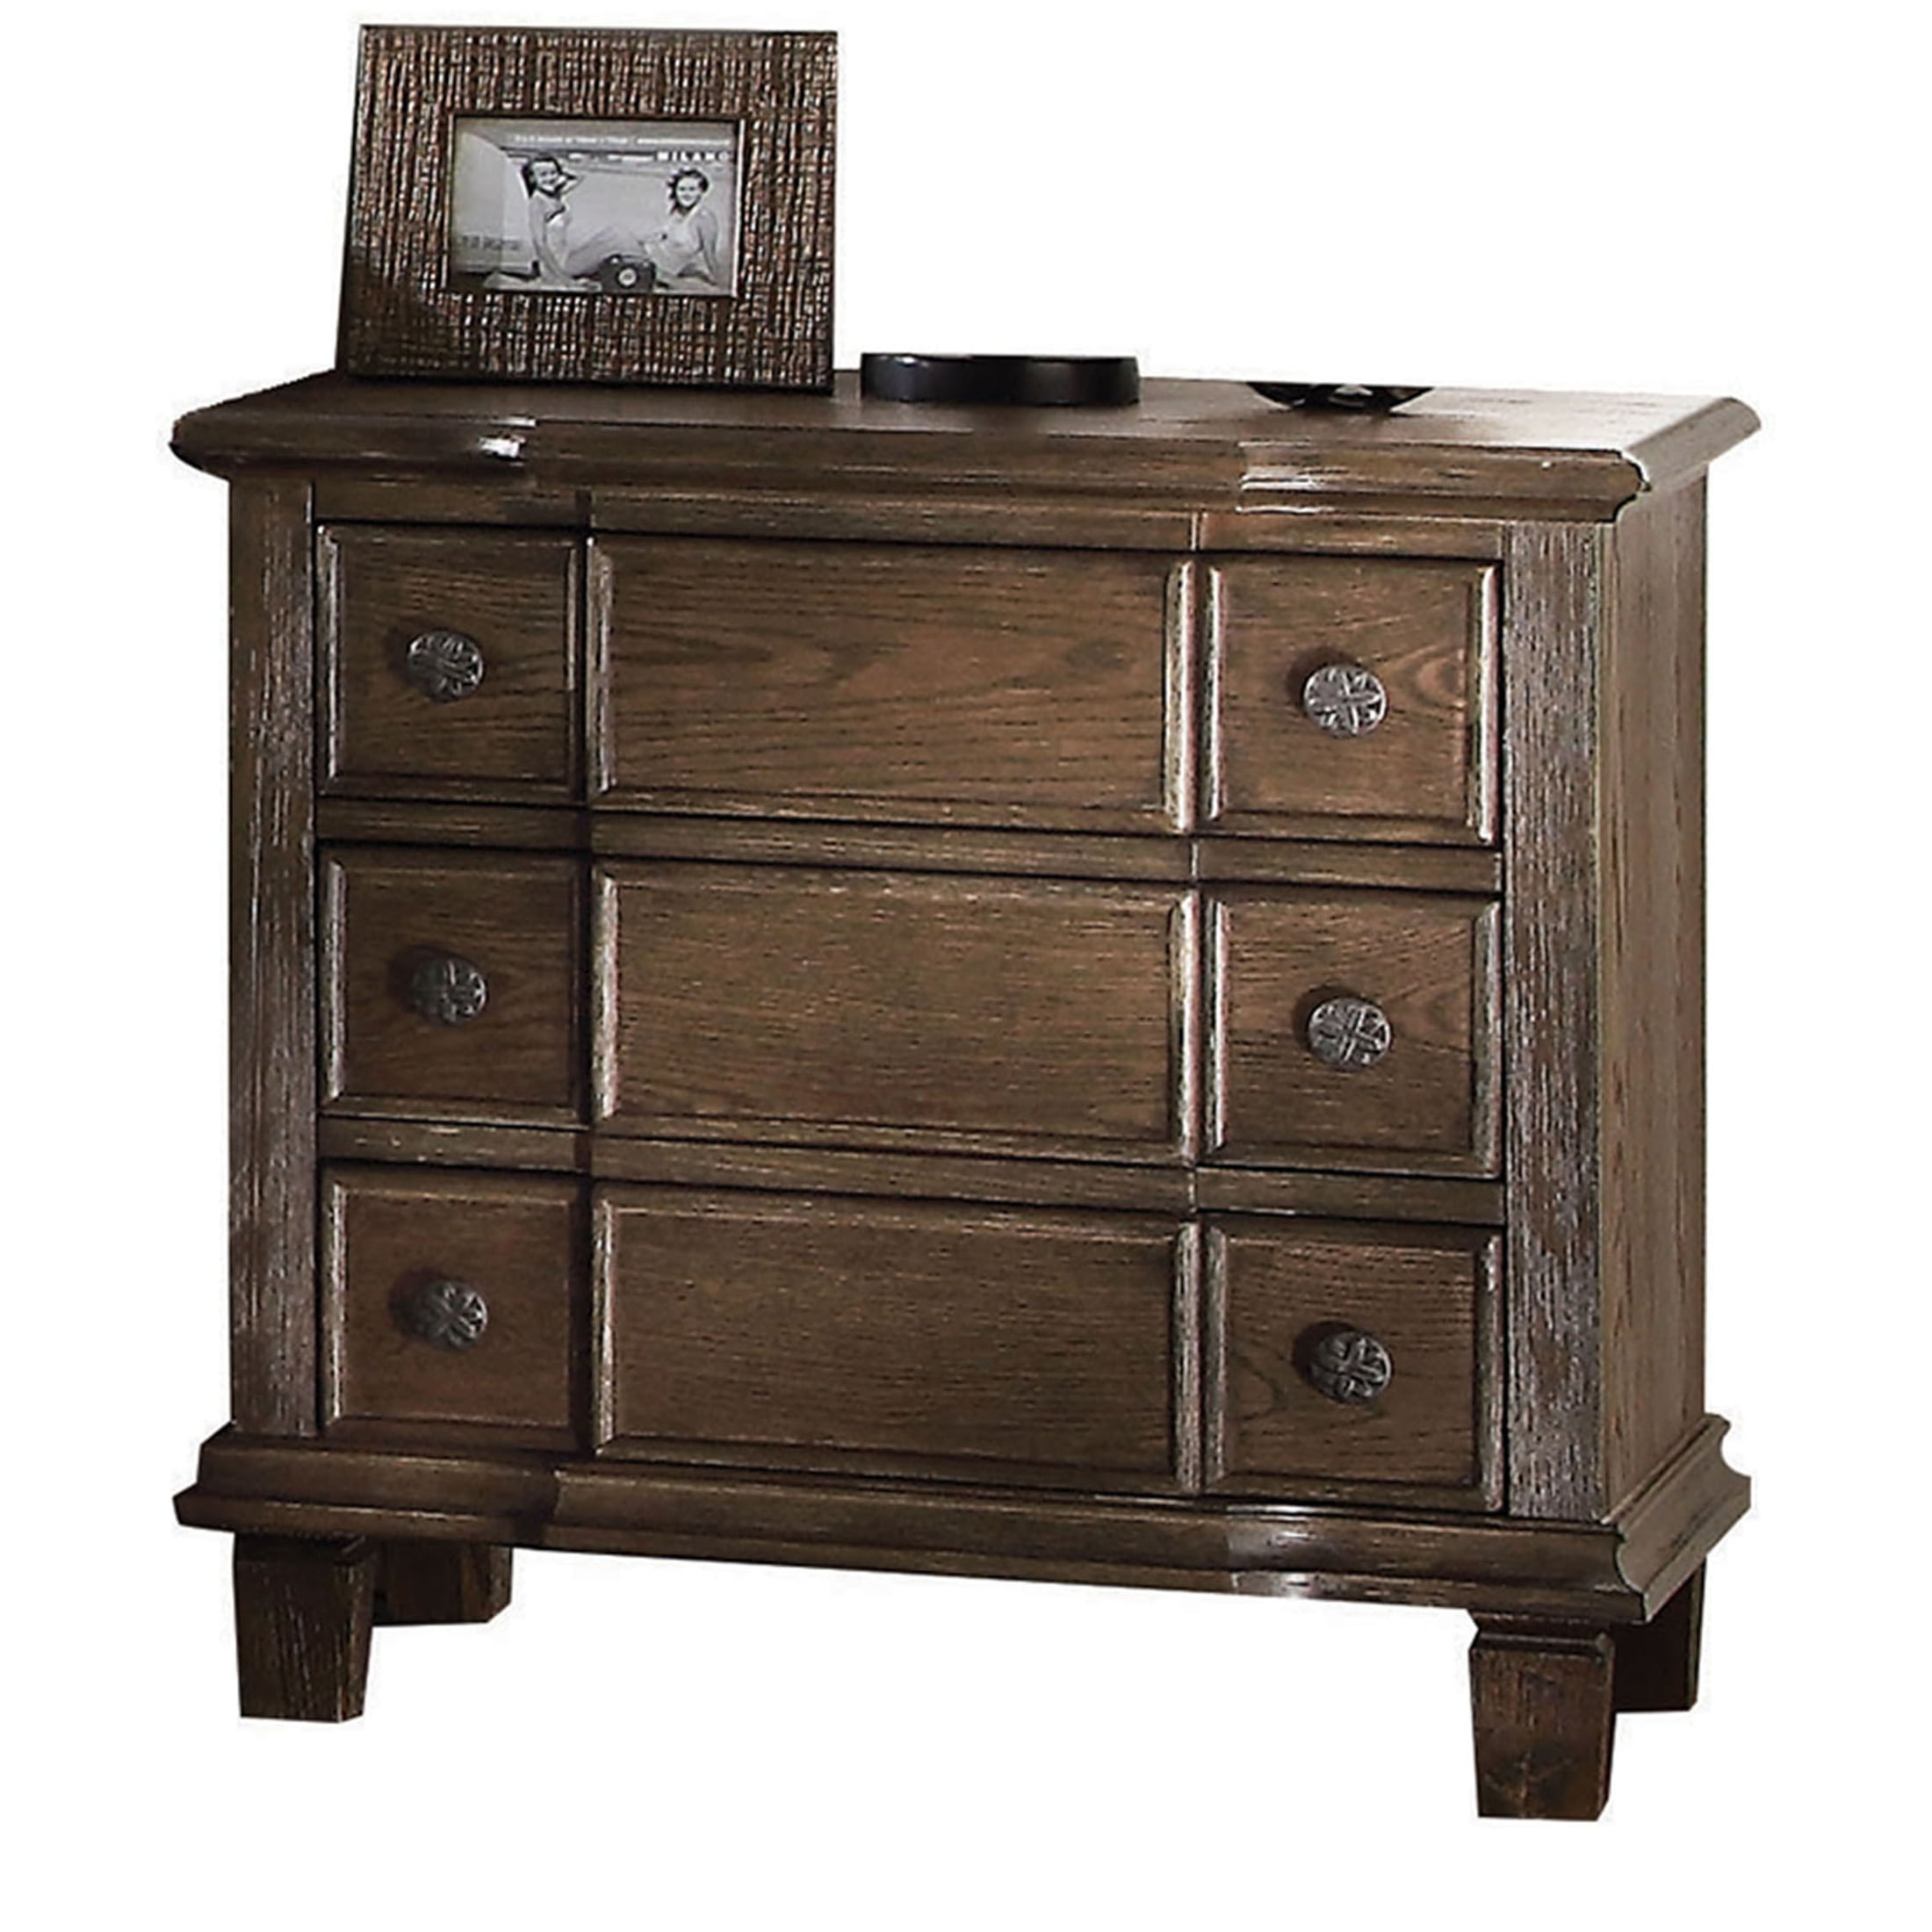 Picture of ACME 26113 Baudouin Nightstand - Weathered Oak - 26 x 27 x 18 in.